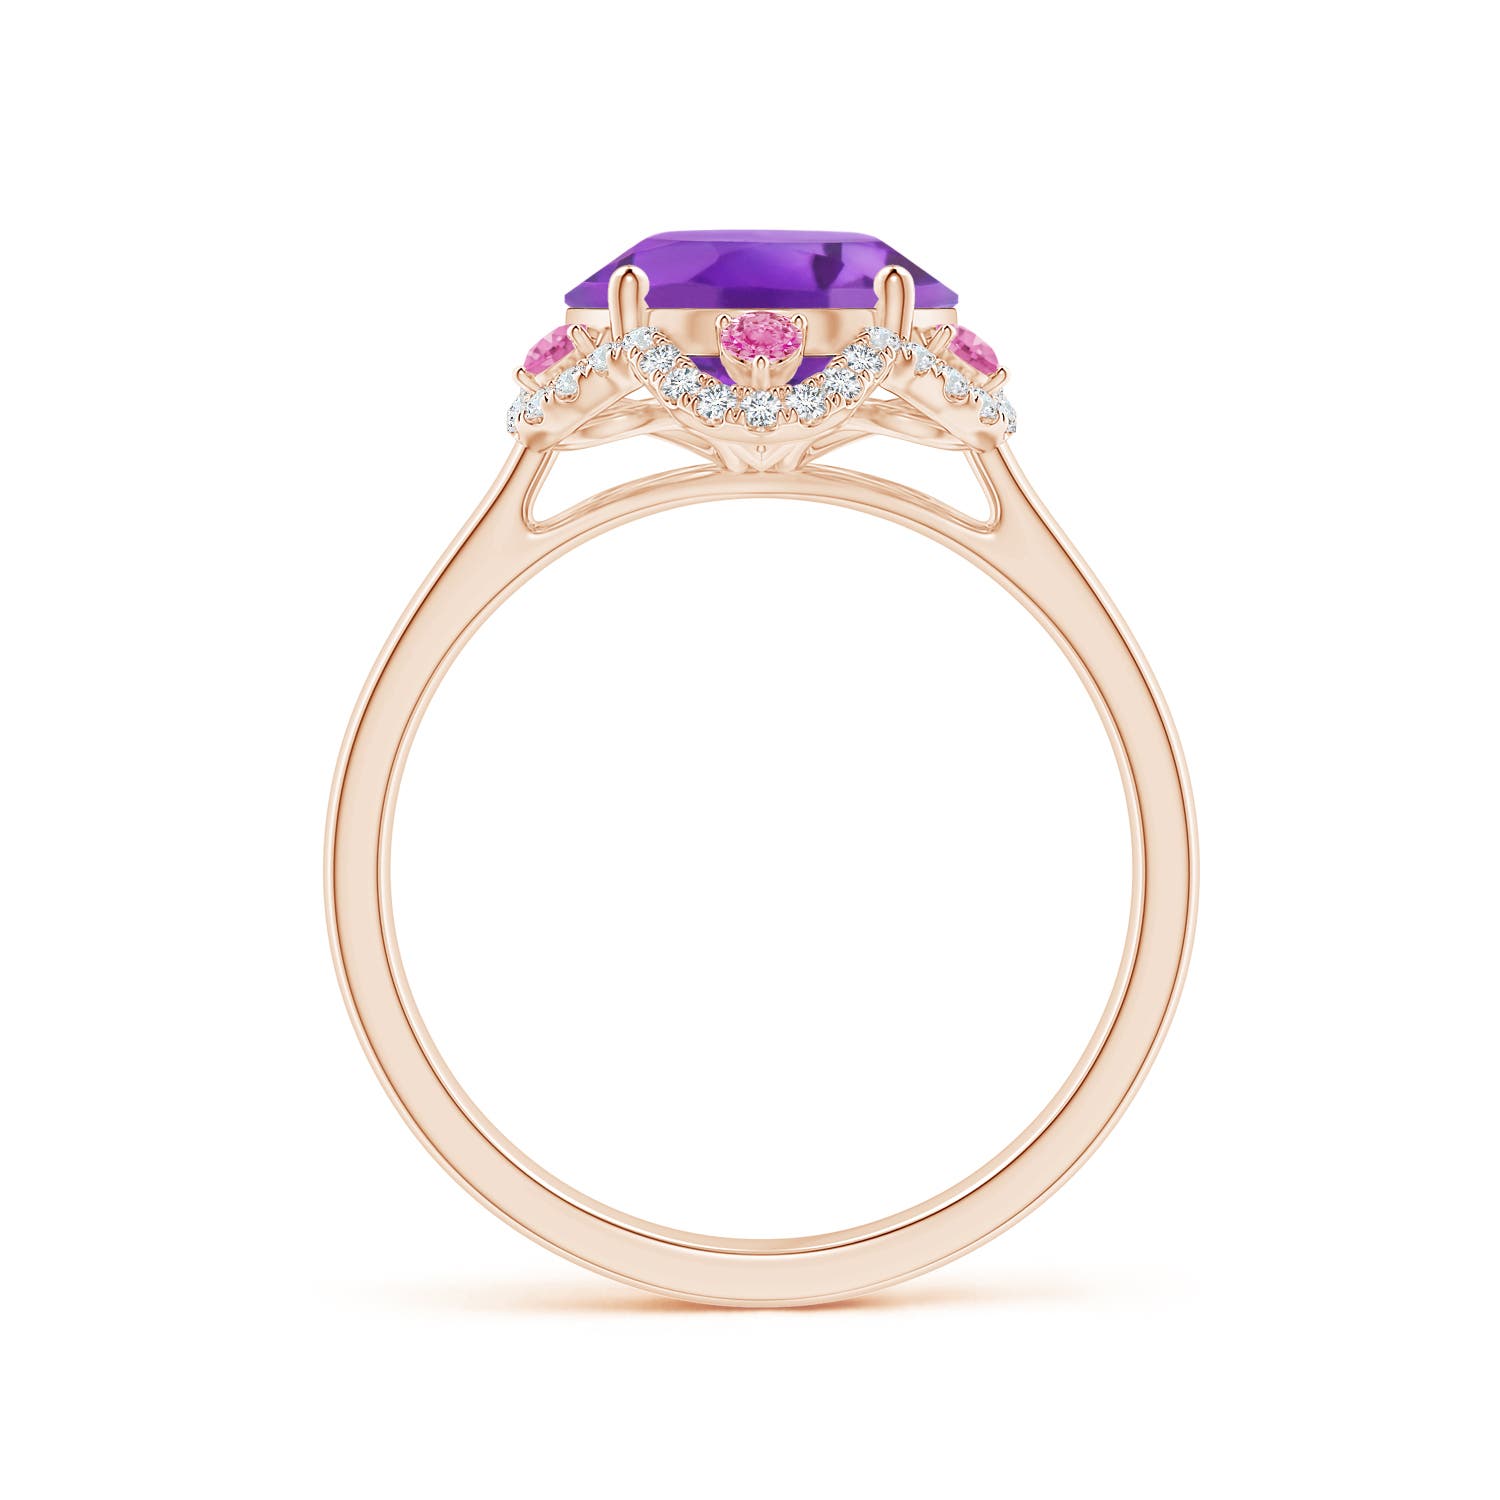 AA - Amethyst / 3.48 CT / 14 KT Rose Gold